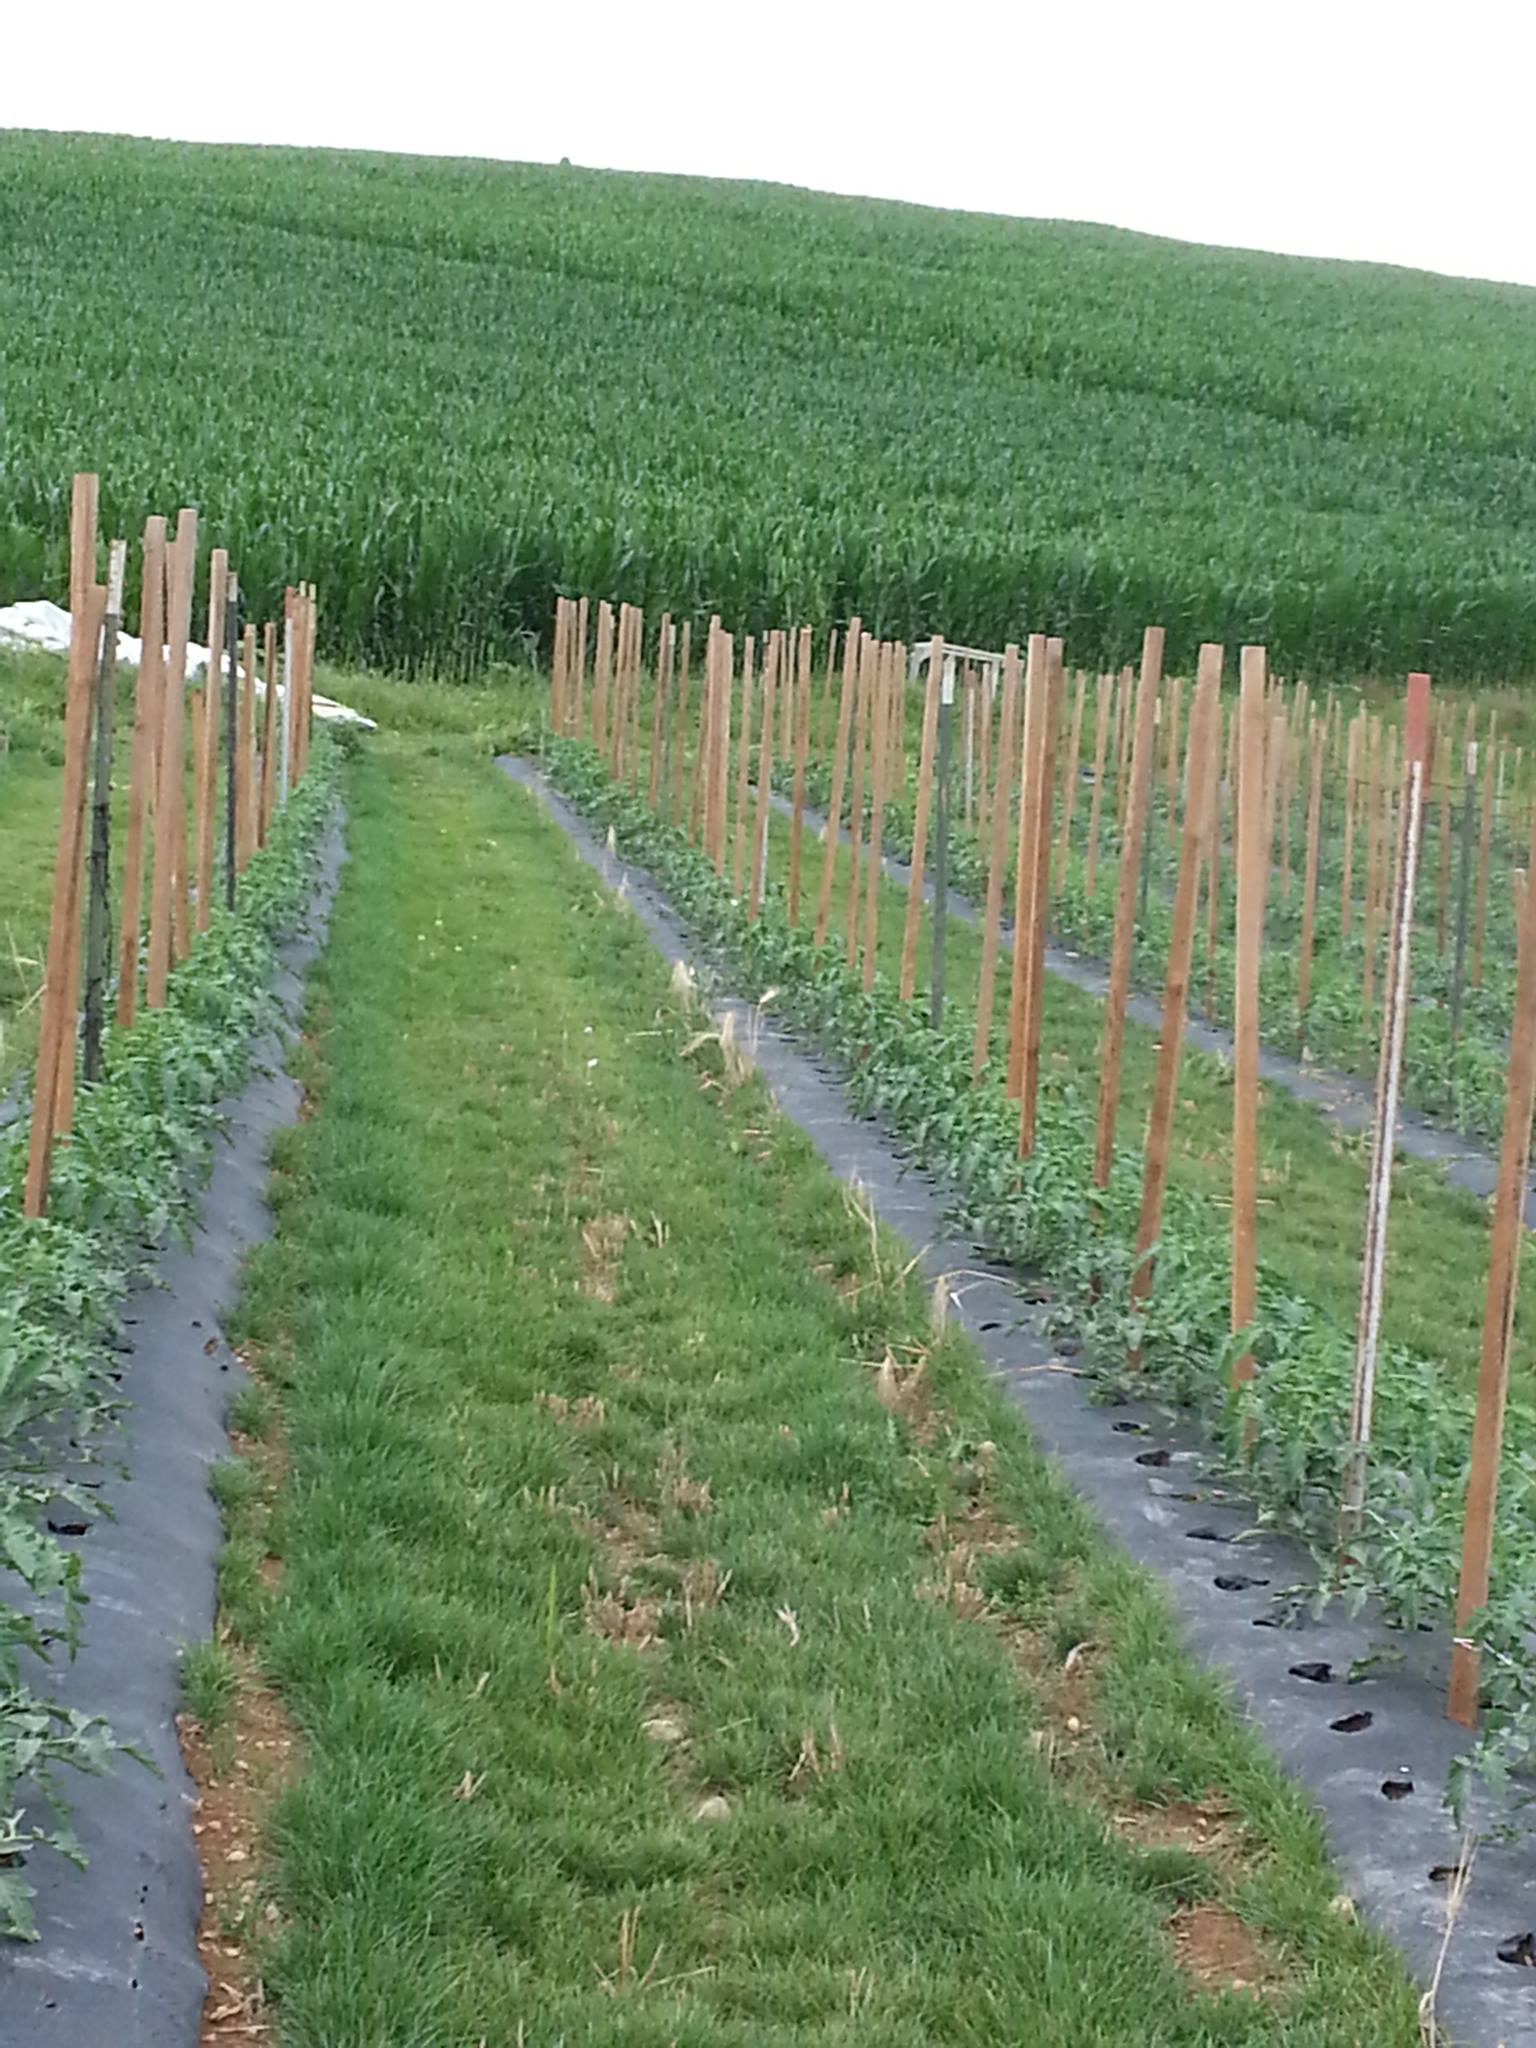 Tomatoes under plastic and with cover crops.